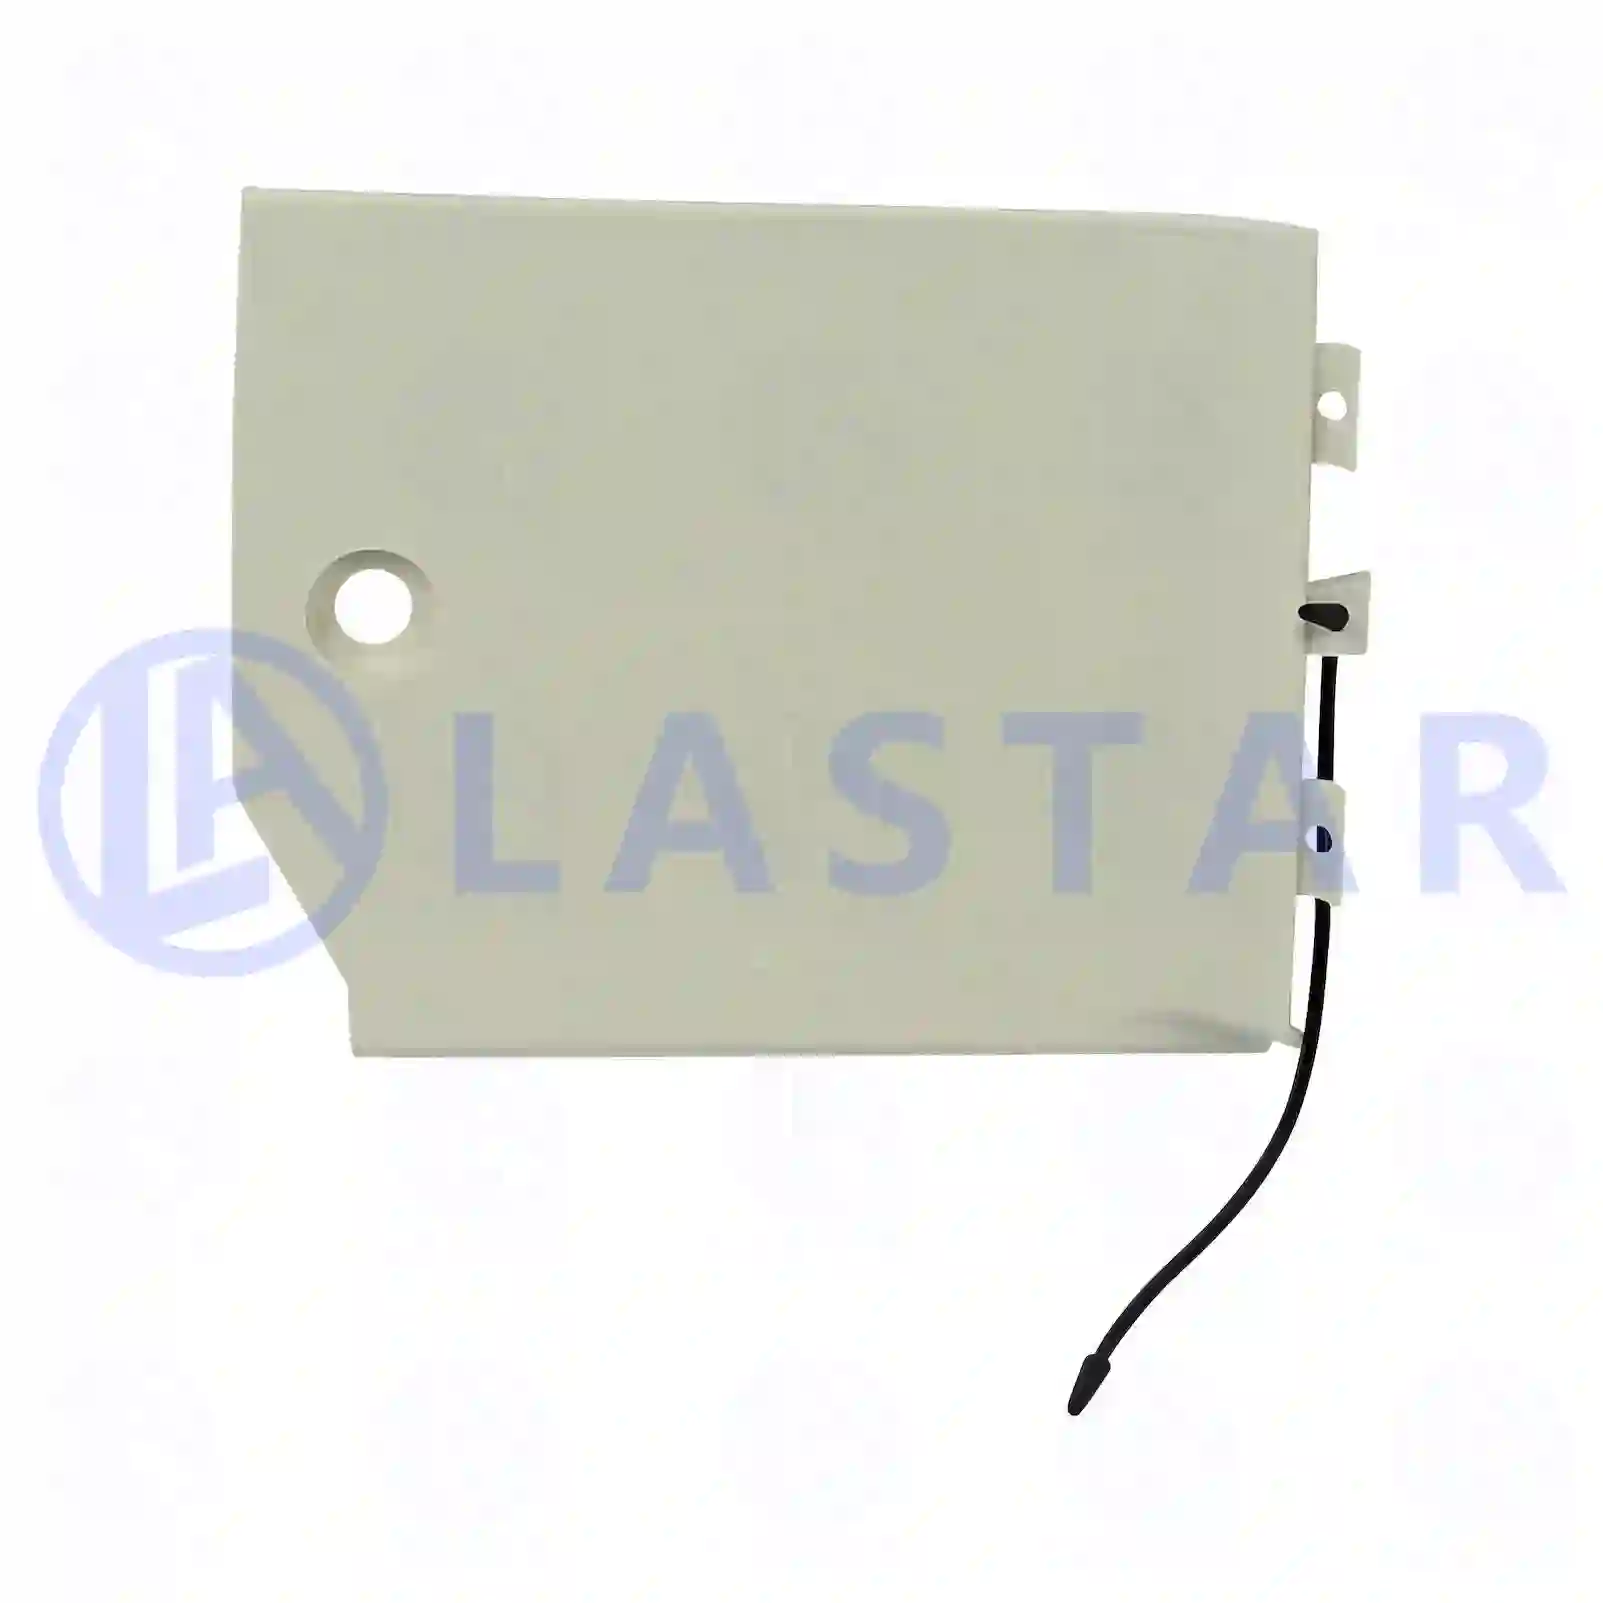 Cover, step well case, right, 77720054, 1828856 ||  77720054 Lastar Spare Part | Truck Spare Parts, Auotomotive Spare Parts Cover, step well case, right, 77720054, 1828856 ||  77720054 Lastar Spare Part | Truck Spare Parts, Auotomotive Spare Parts